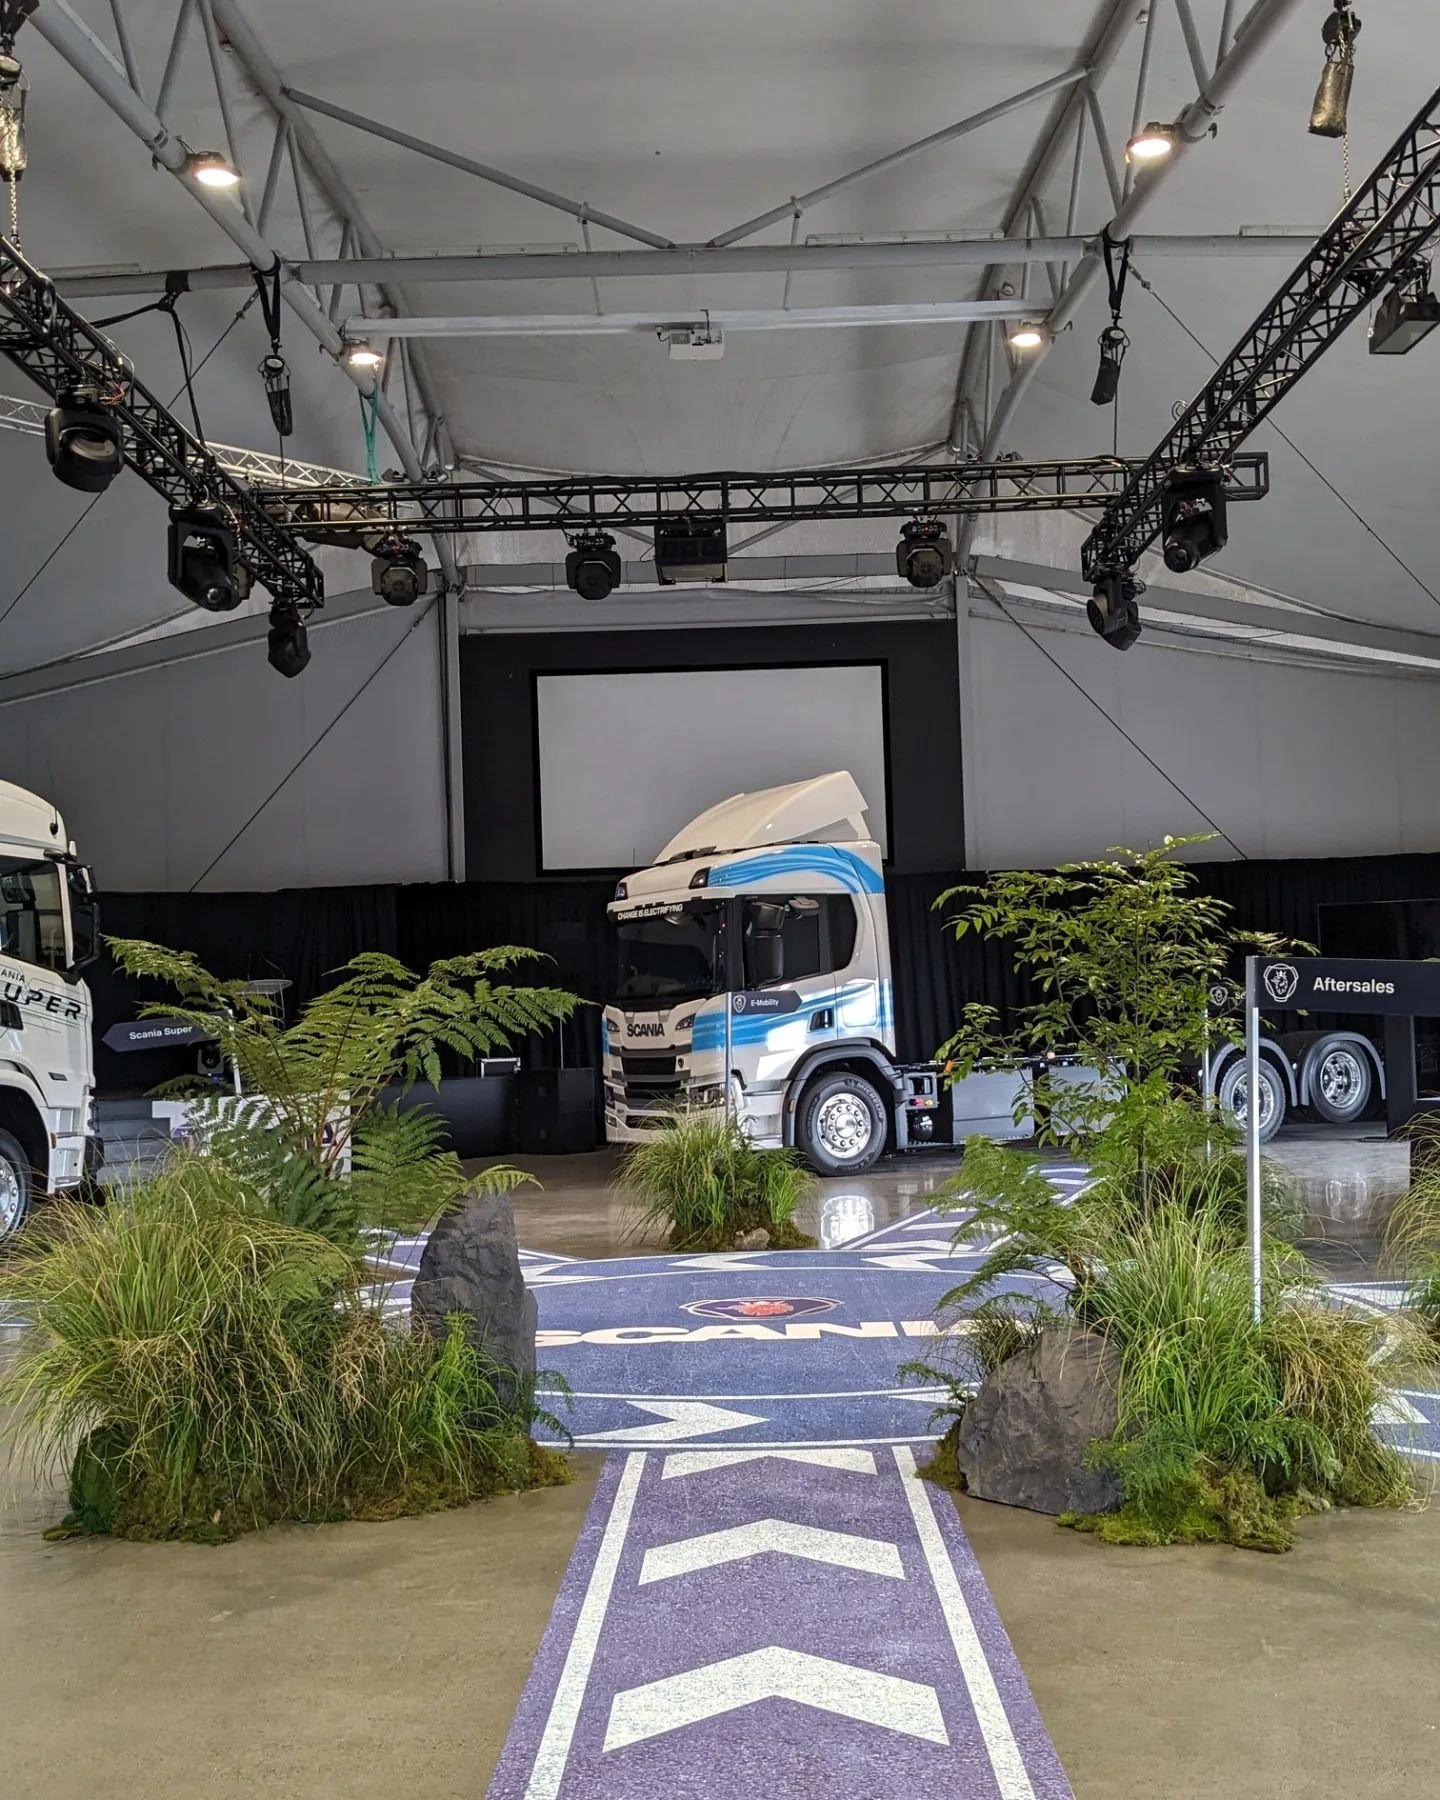 🗻 Infusing some Scandinavian vibes with mossy rocks, grasses and ground ferns for @scanianz new electric truck launch 🚛

#productlaunch